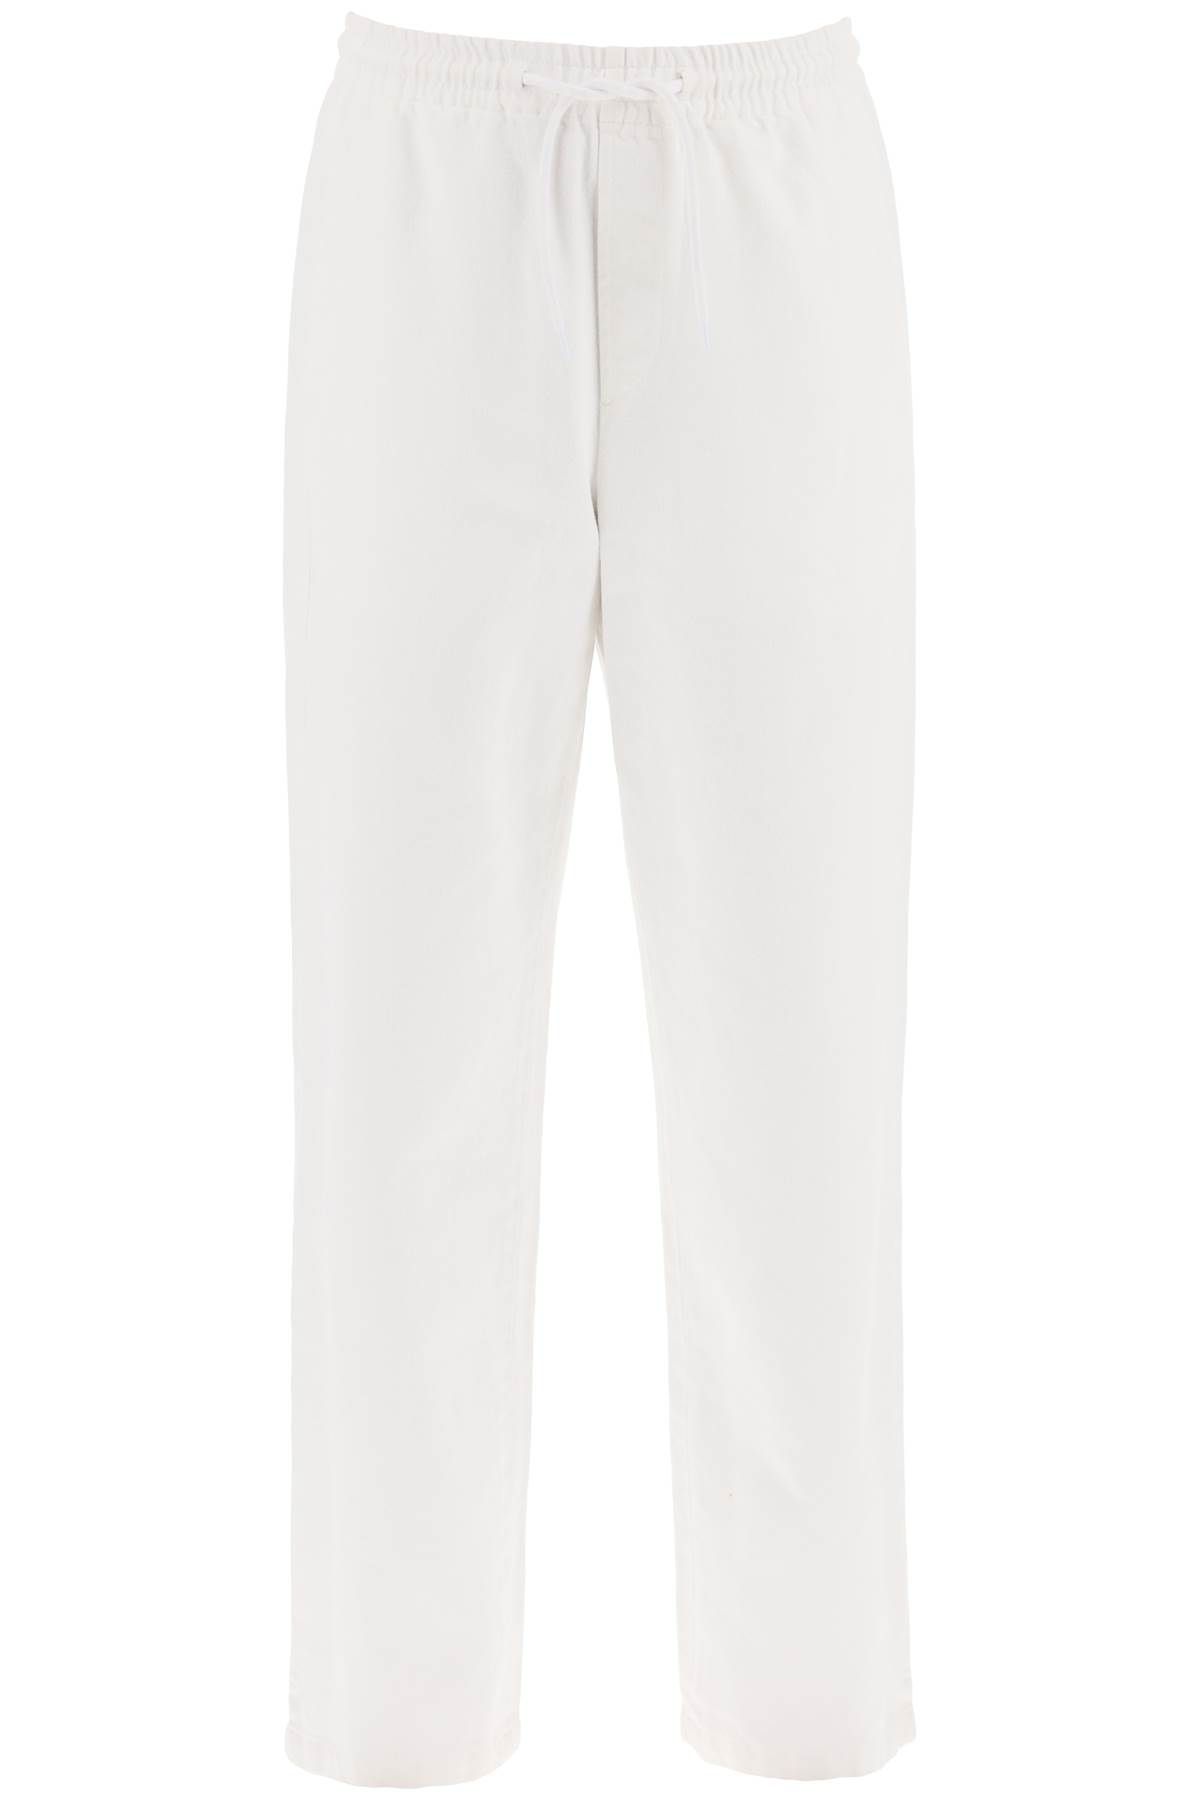 Shop Apc Vincent Jeans With Drawstring Waistband In White